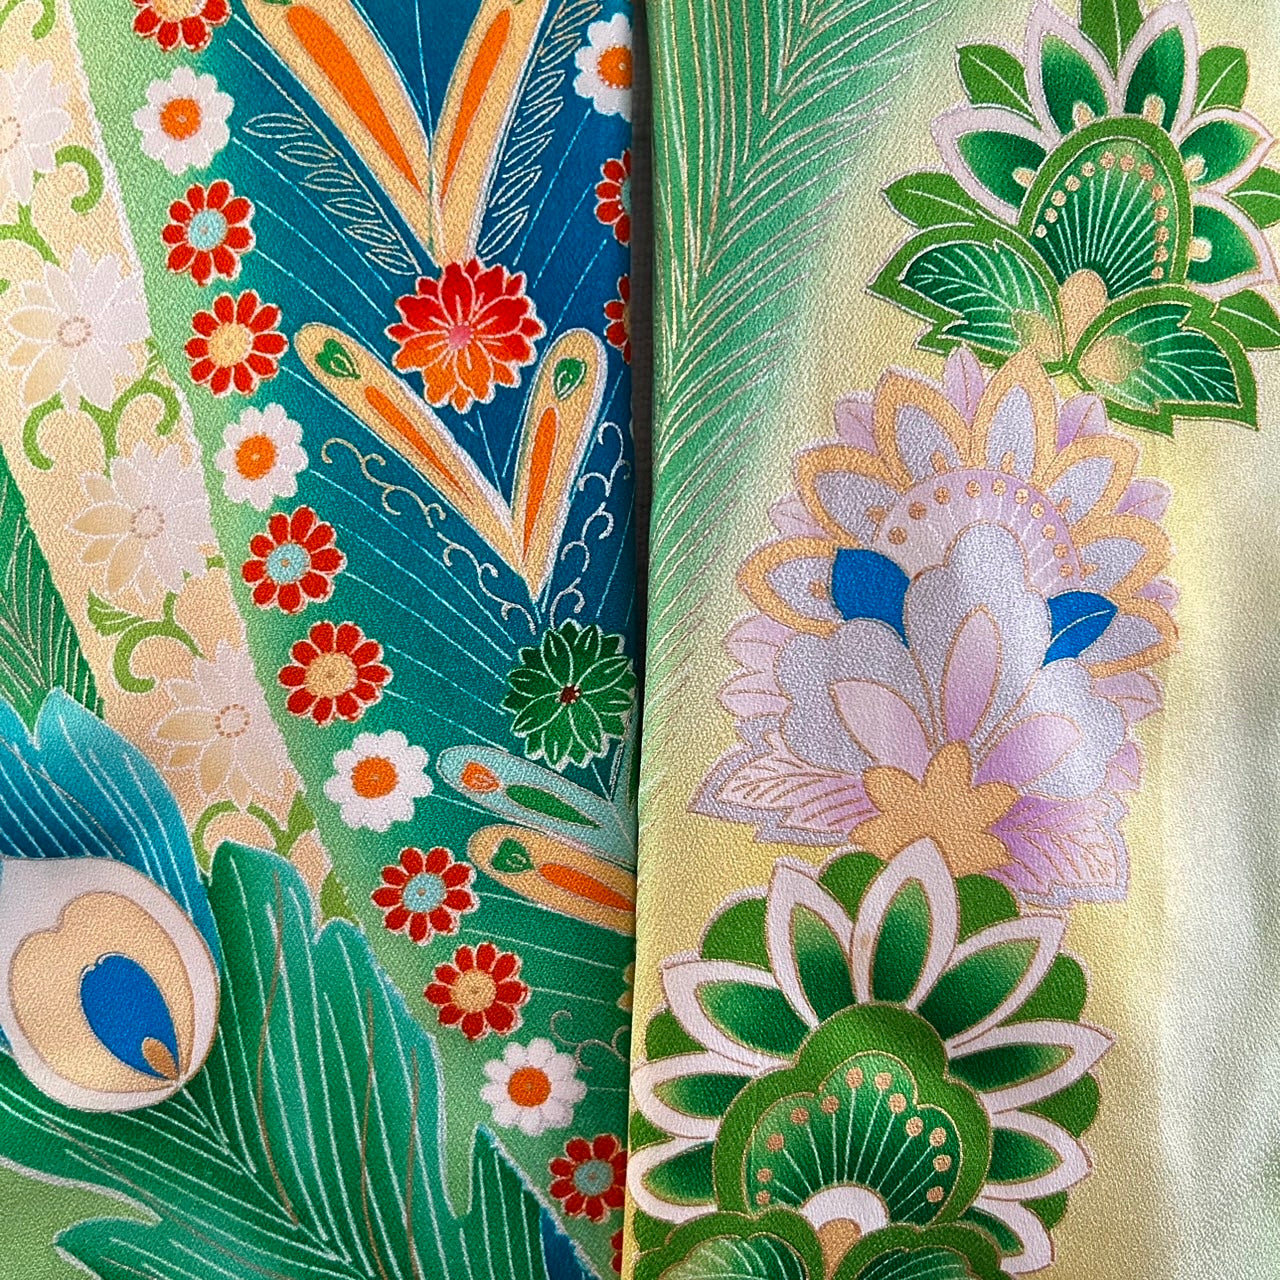 Silk Kimono scarf, Handcrafted, Upcycled, Furisode 振袖, #2035